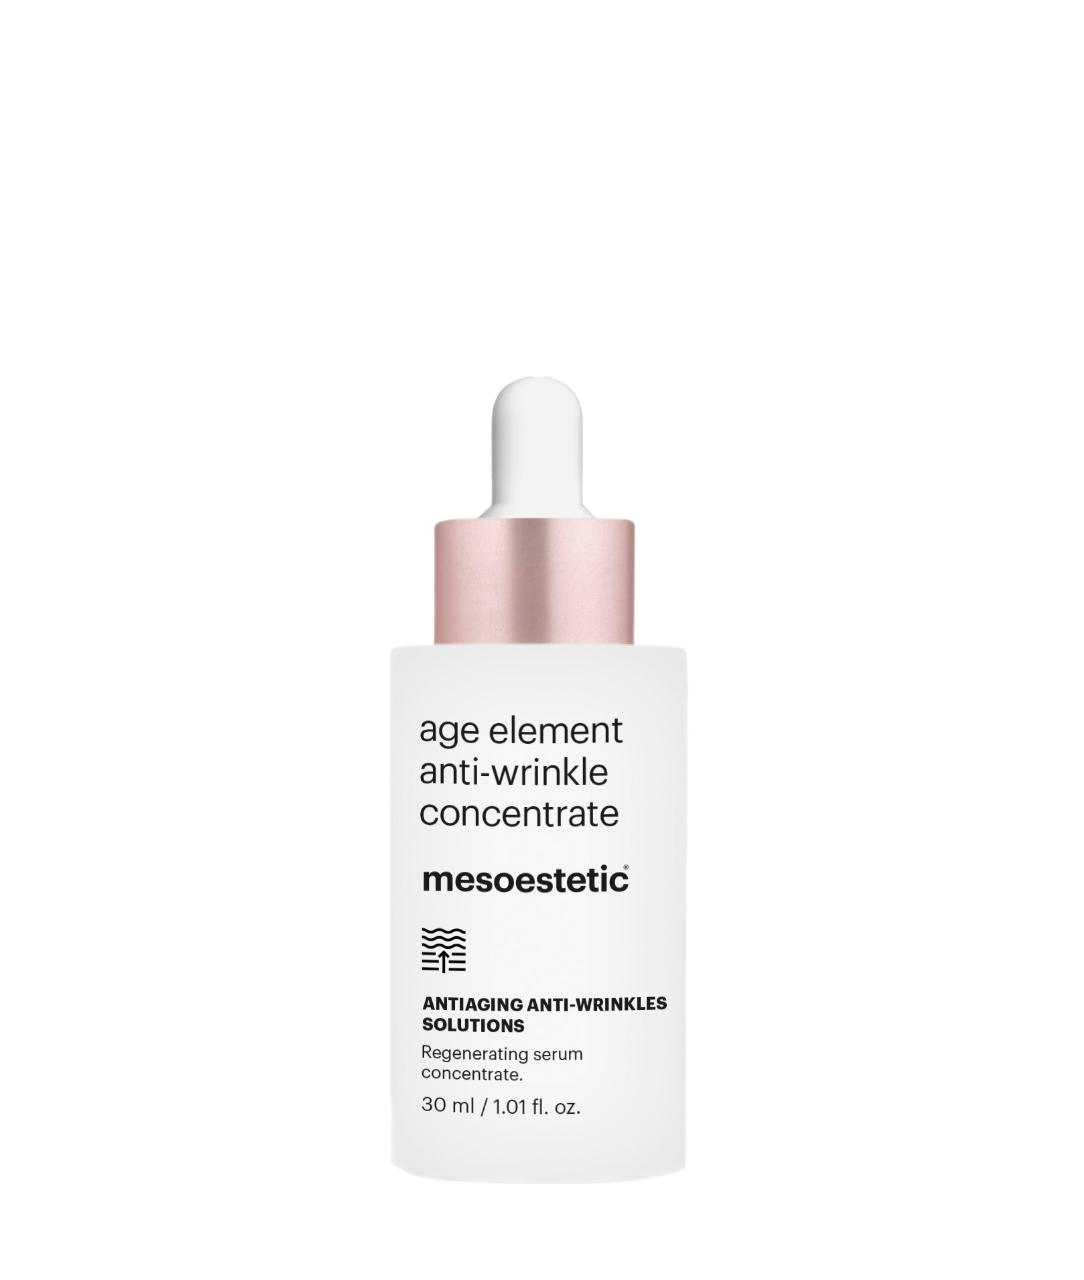 1) Anti-wrinkle concentrate_Product